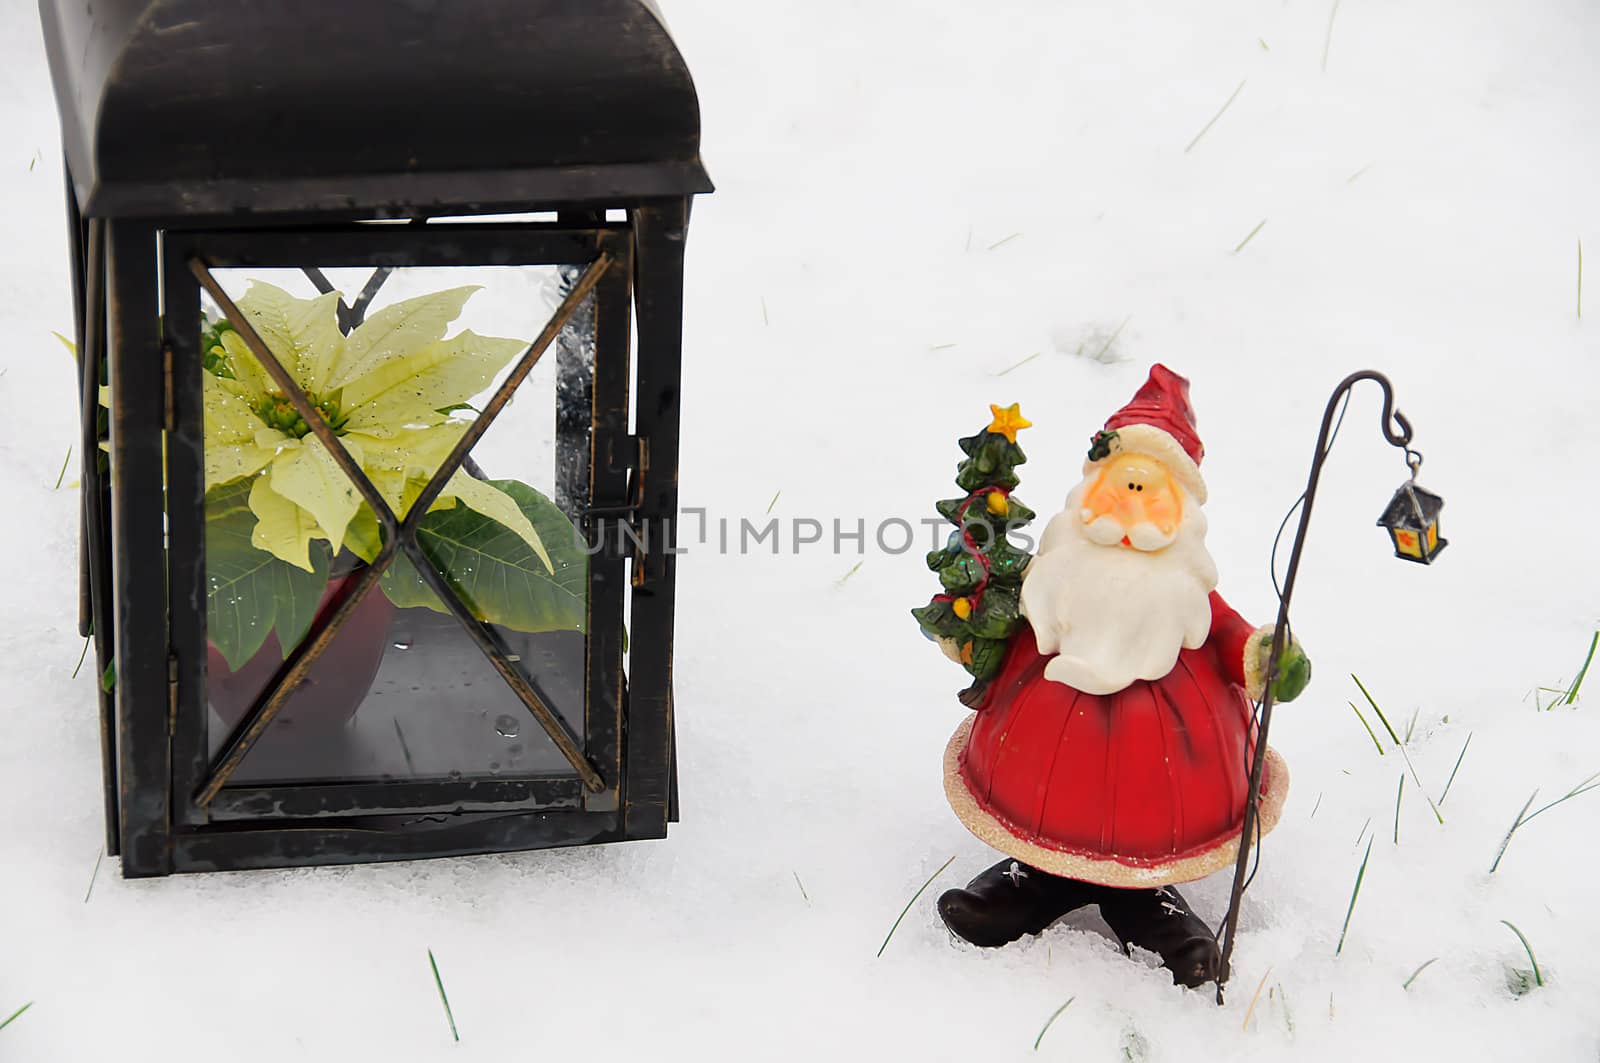 Lamp with a poinsettia and Santa Claus in a winter garden